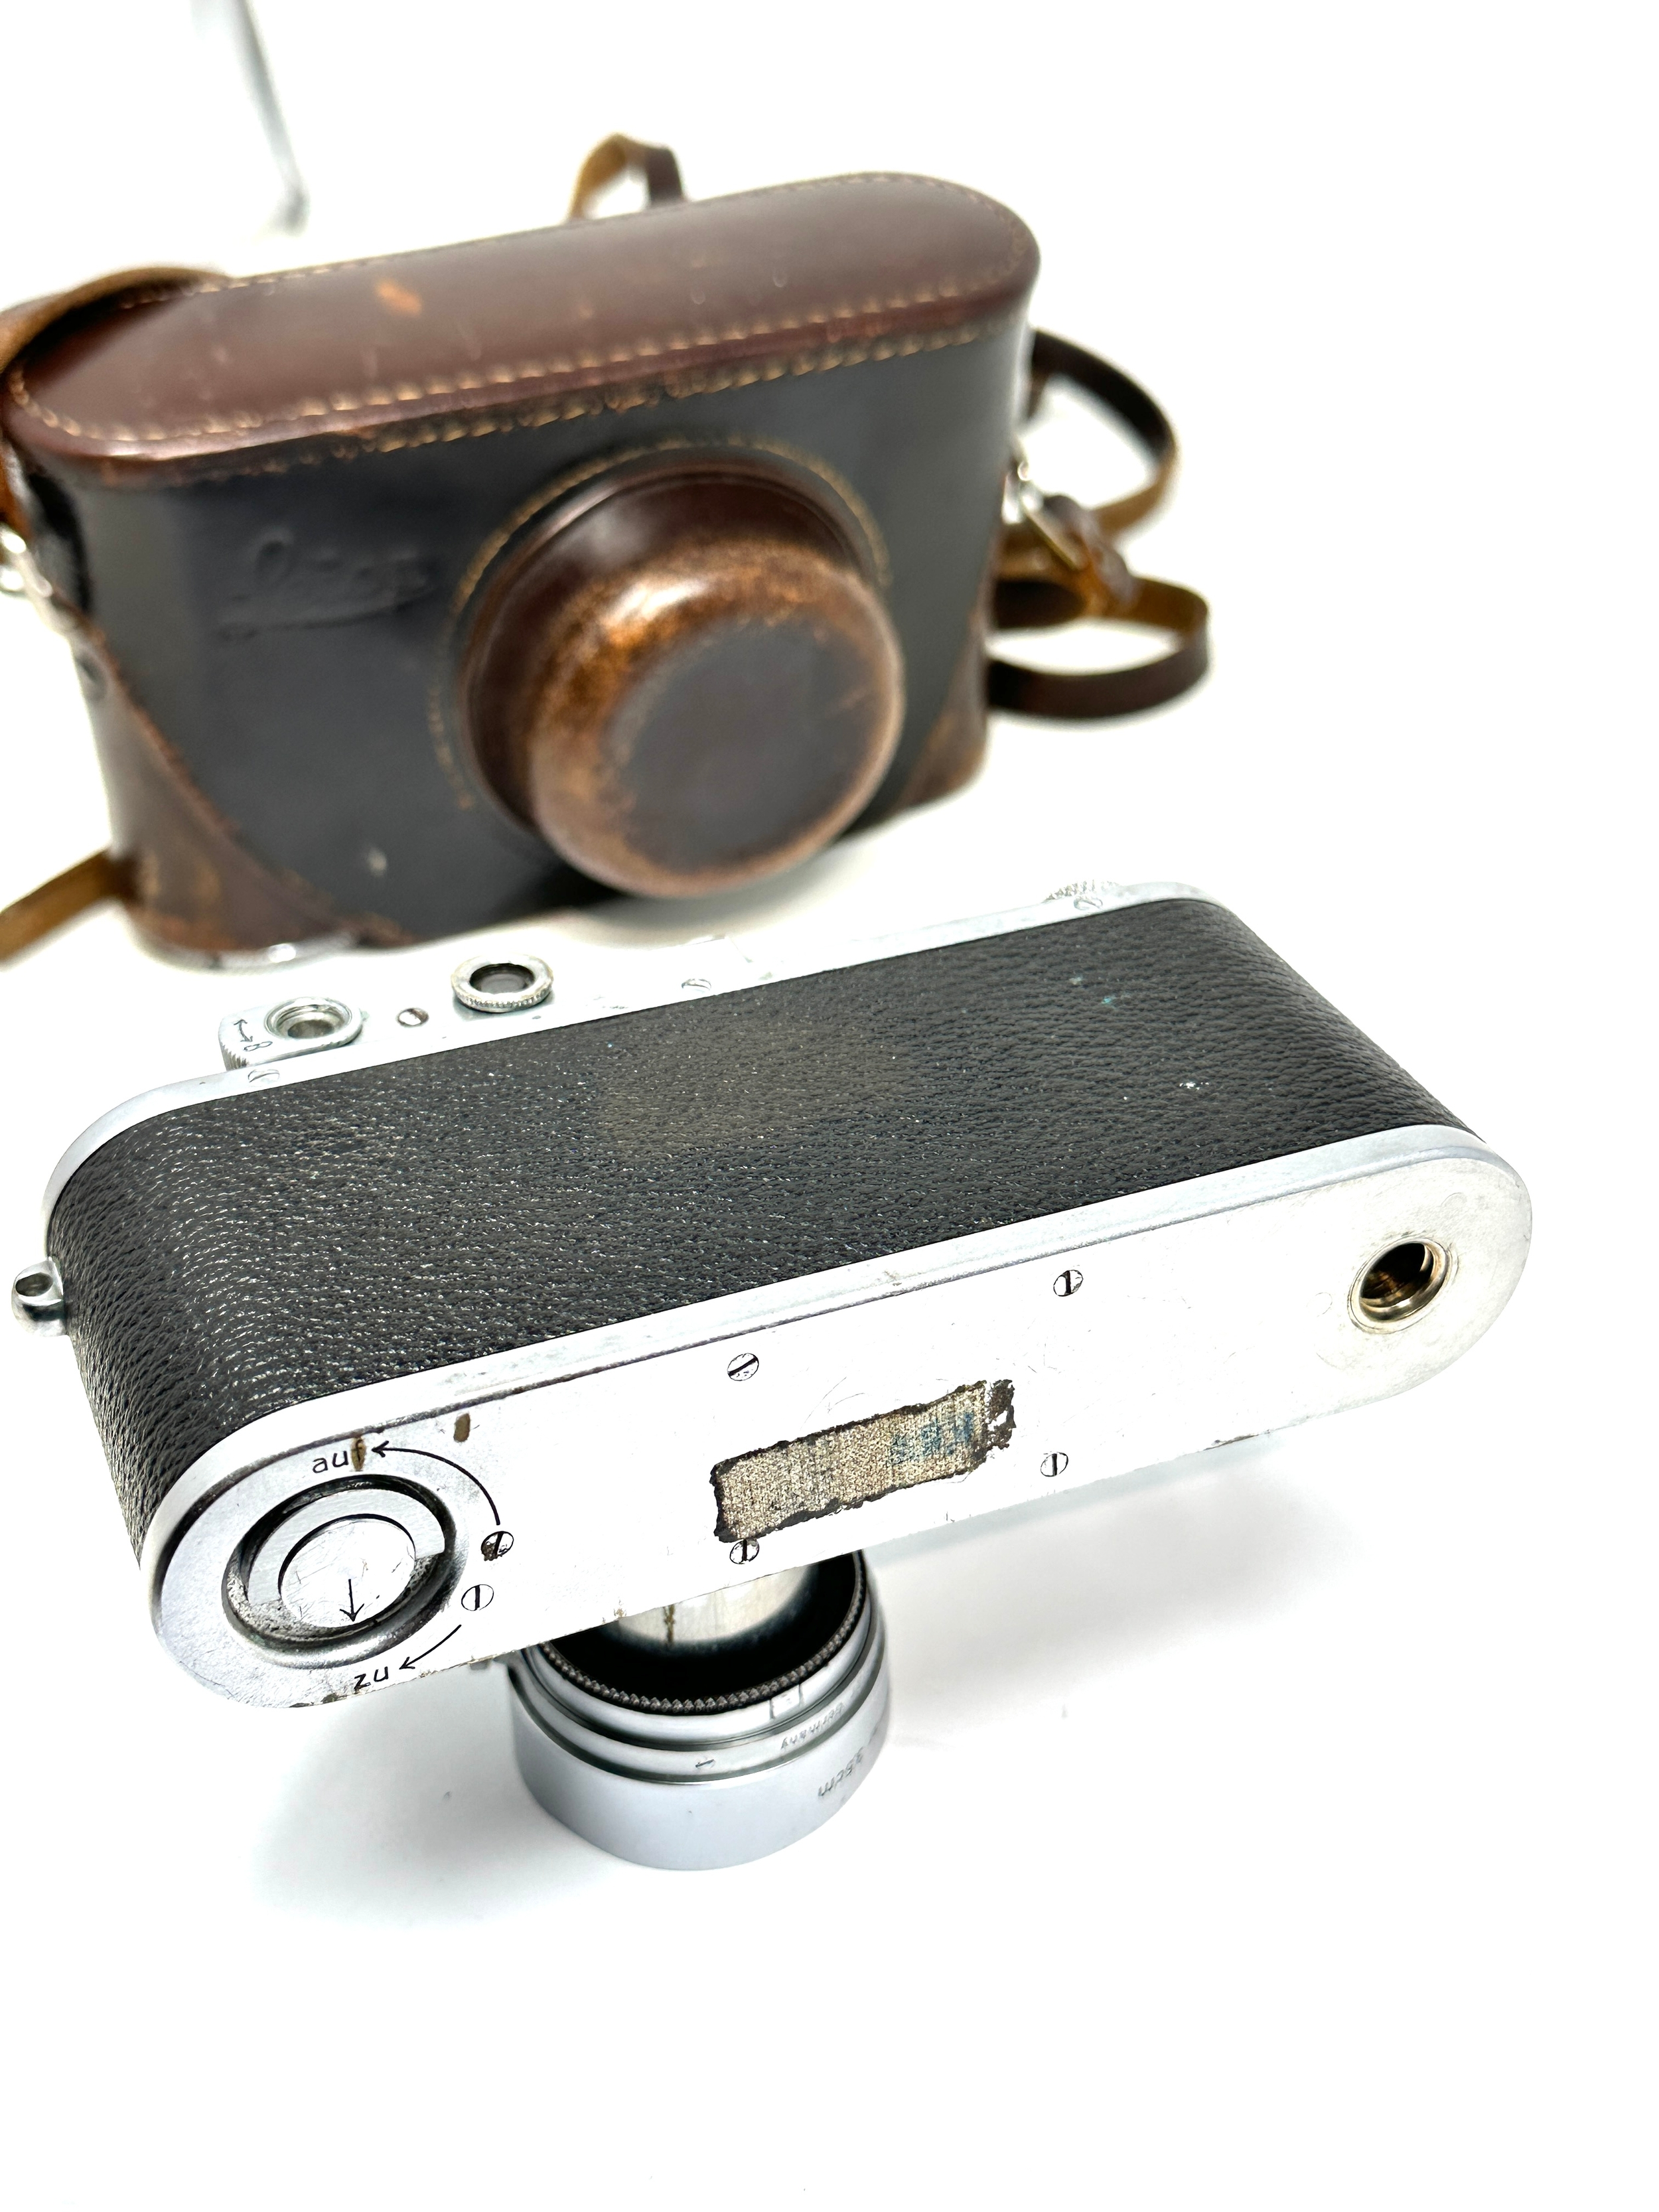 Vintage leica camera original leather cased reads Leica N 150356 Ernst Leitz d.r.p also reads on - Image 5 of 10